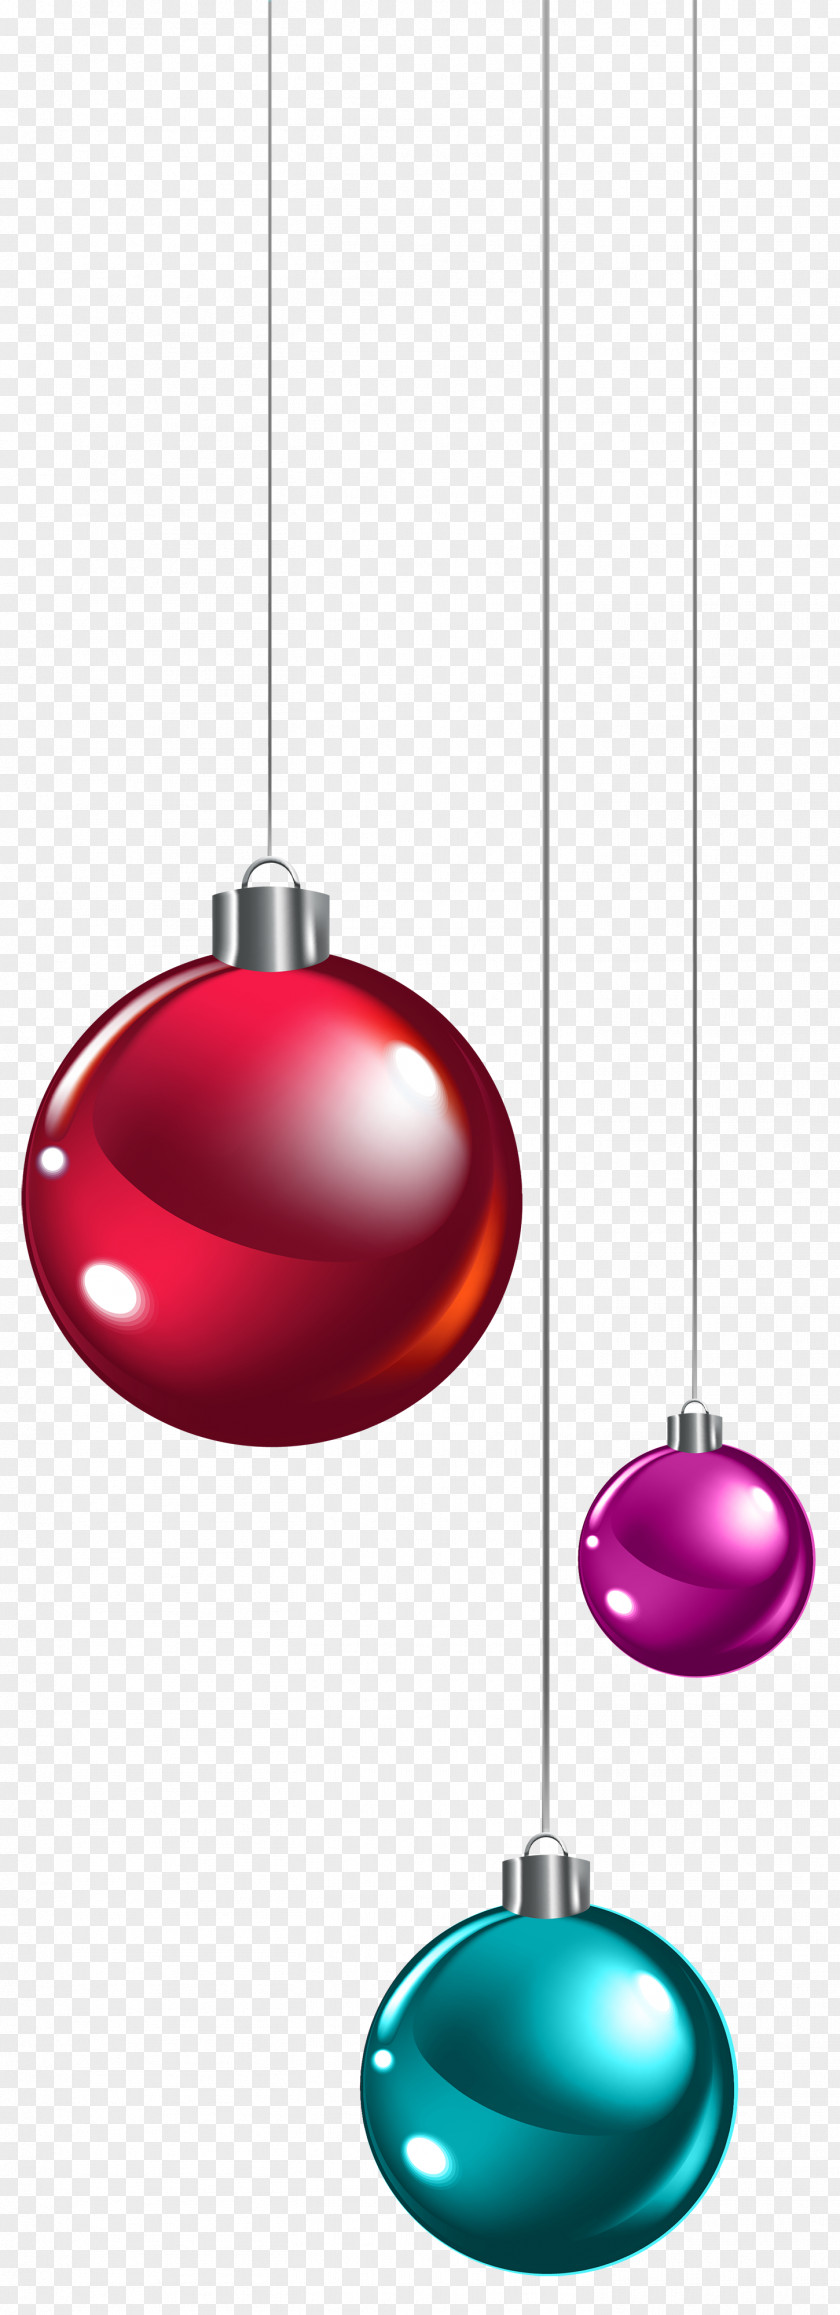 Christmas Balls Available In Different Size Gold Coast Kenkey Ornament Clip Art PNG